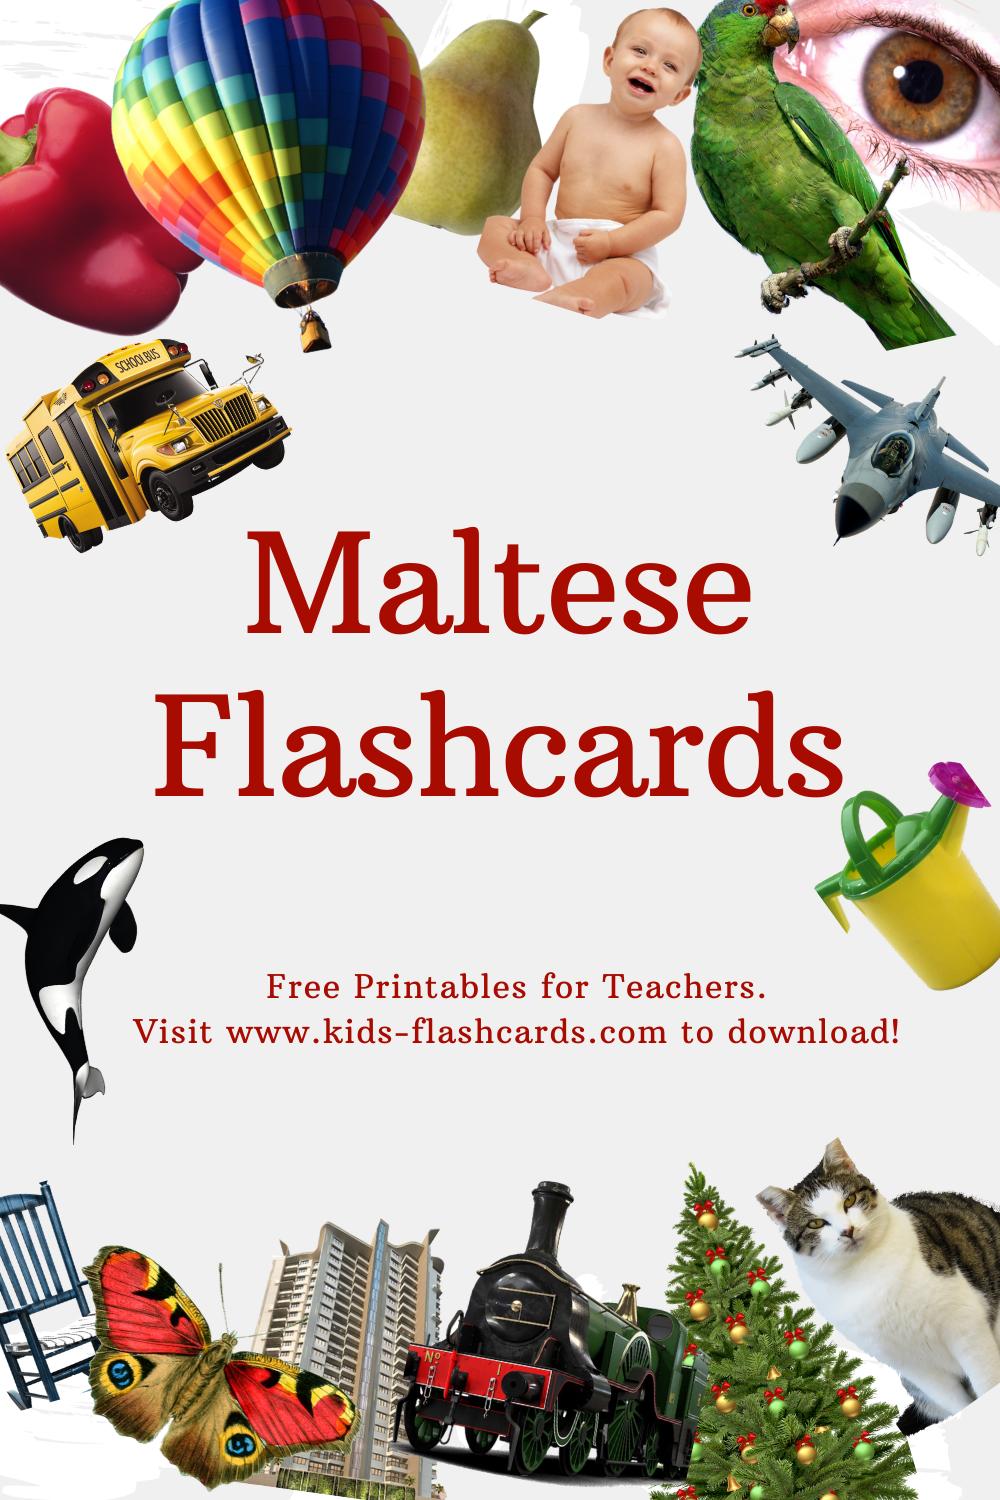 Worksheets to learn Maltese language